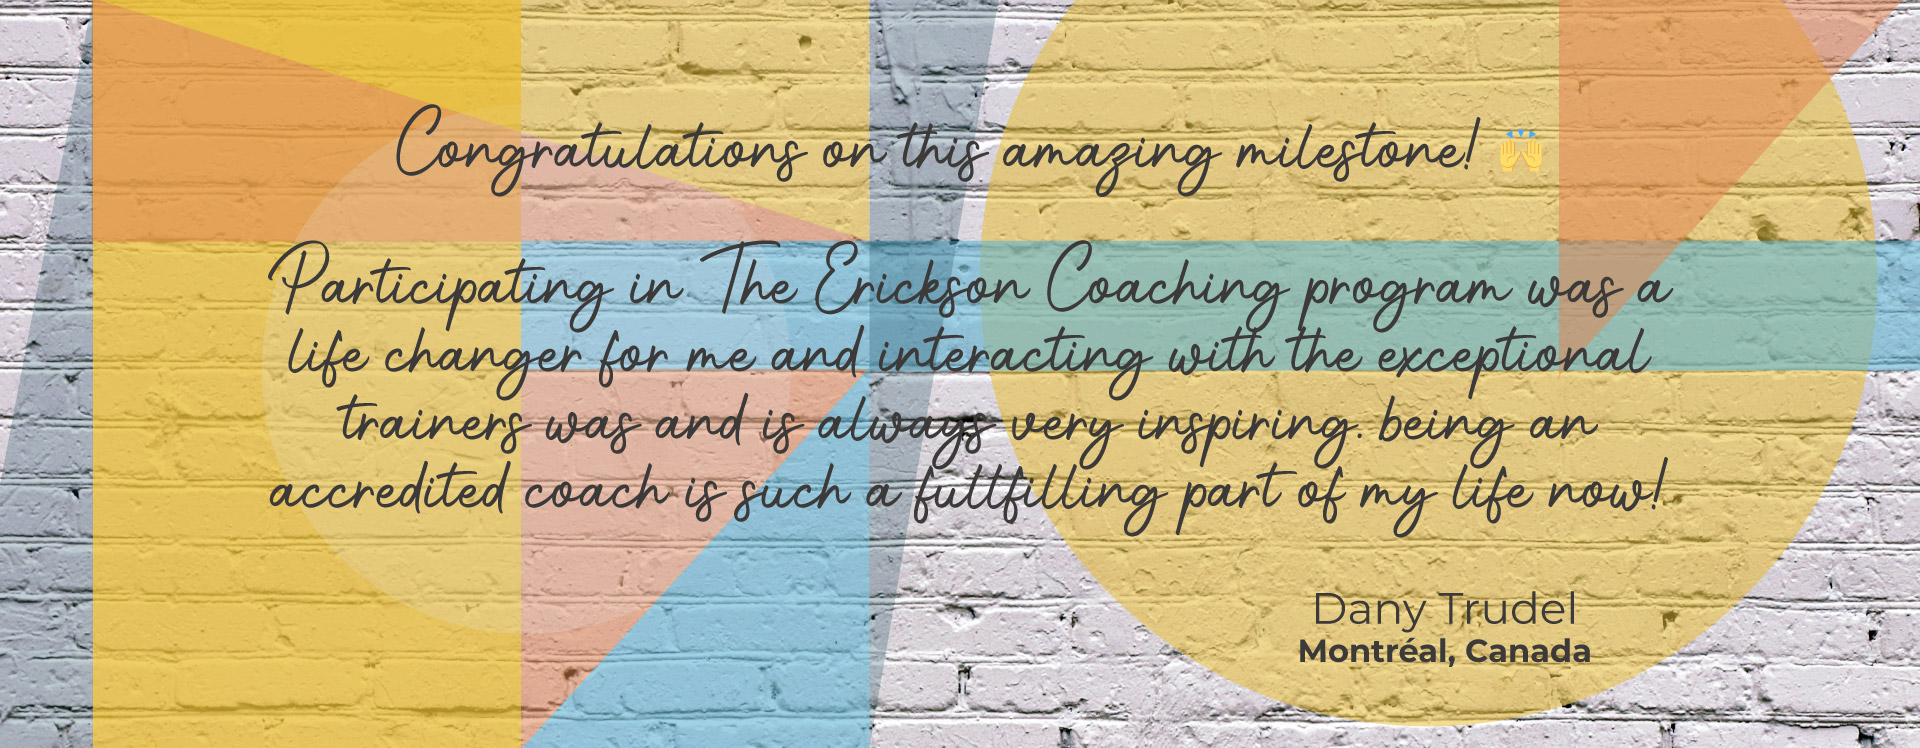 congratulatory messages from erickson alumni in celebration of 20 years with the international coaching federation